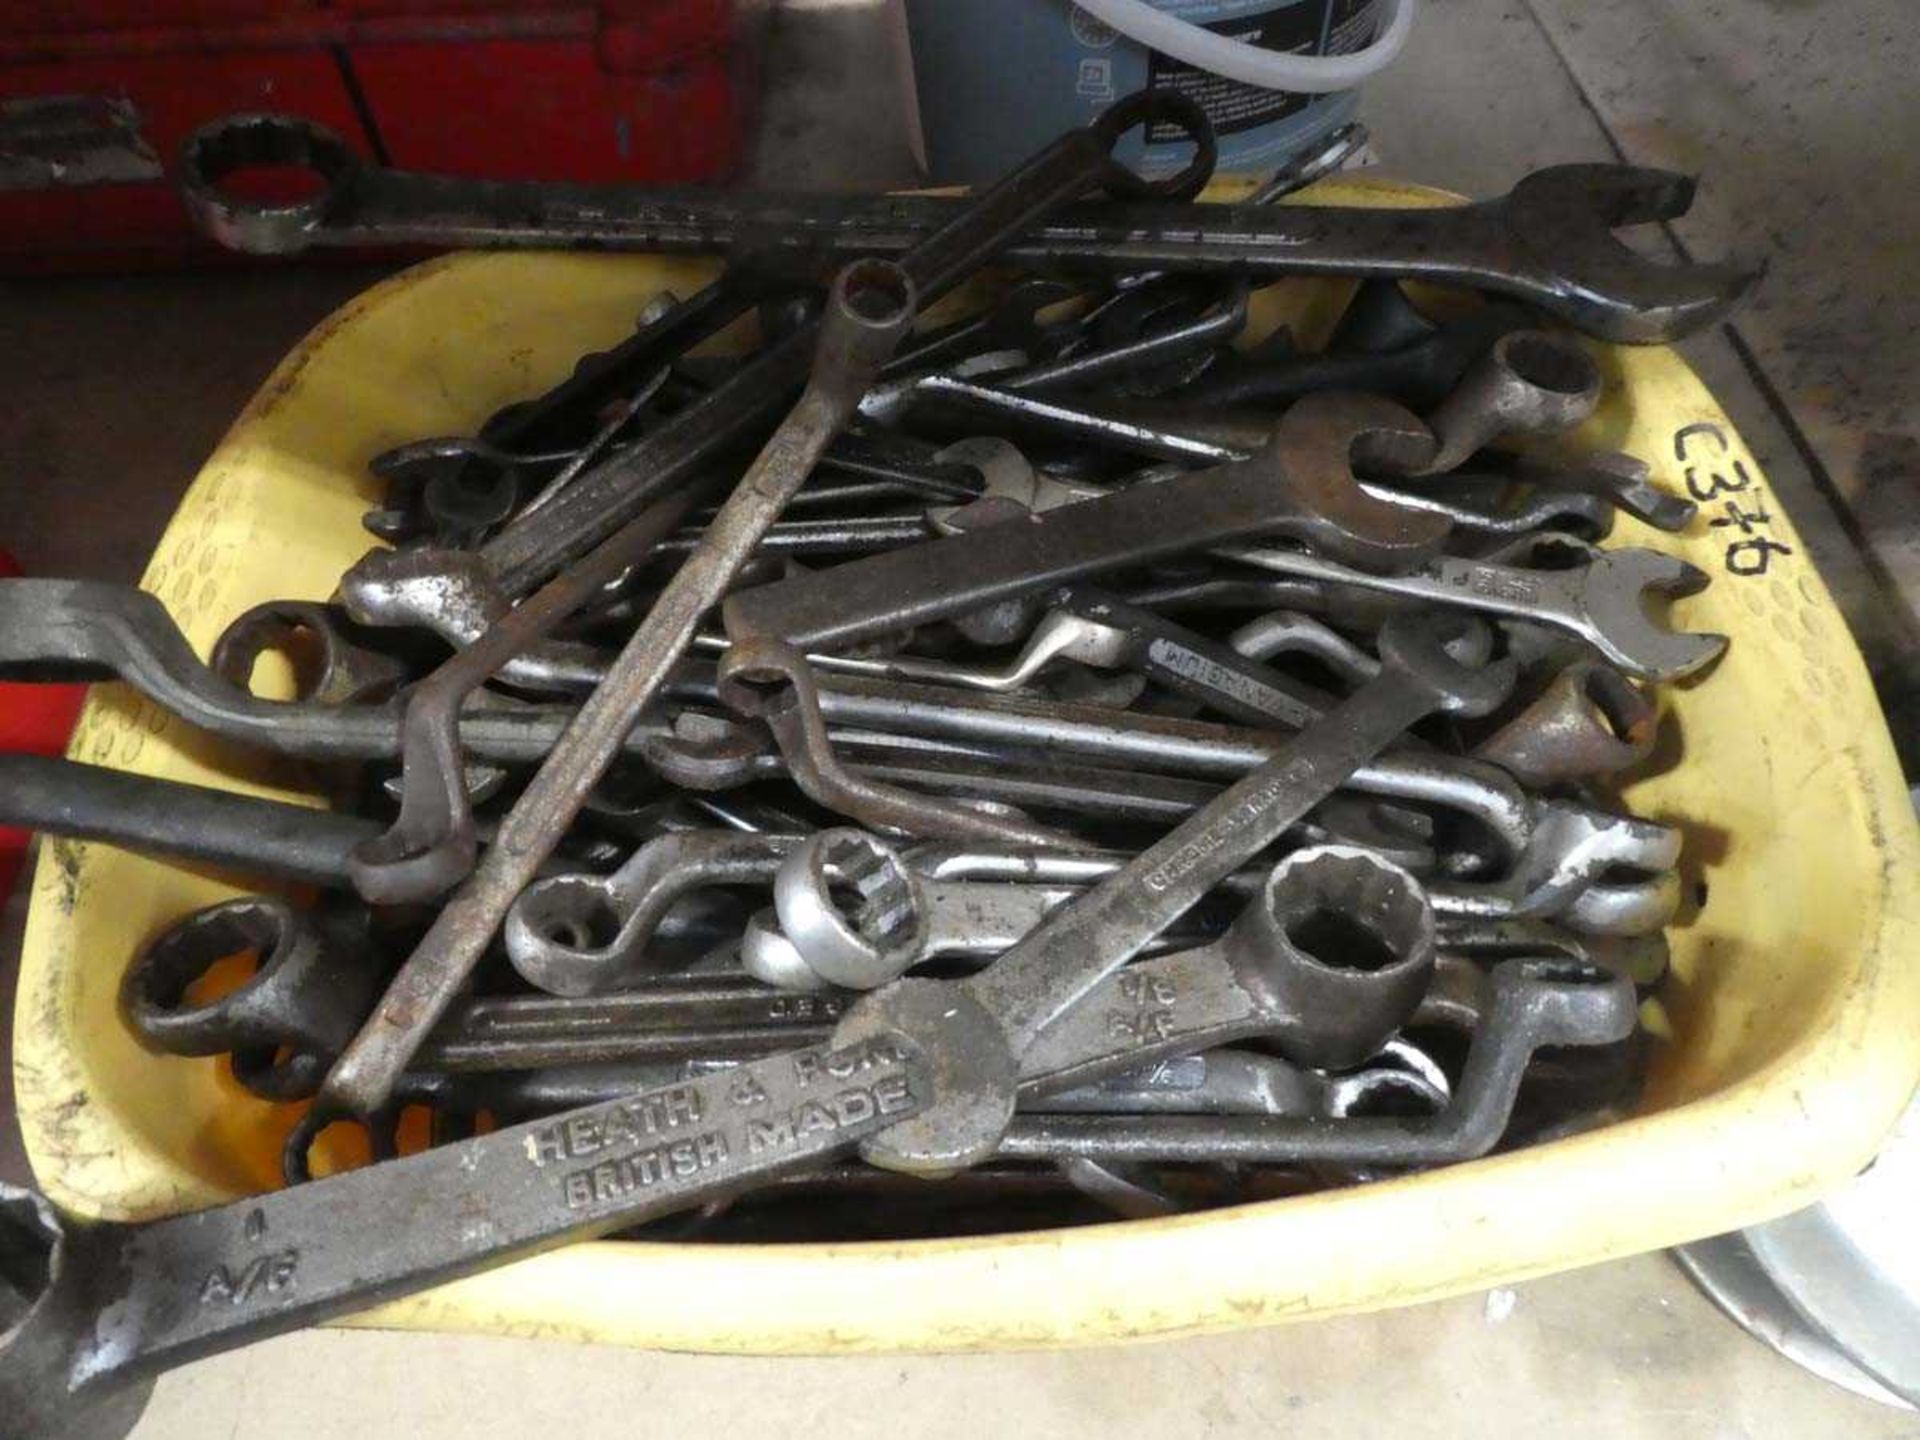 Box of spanners